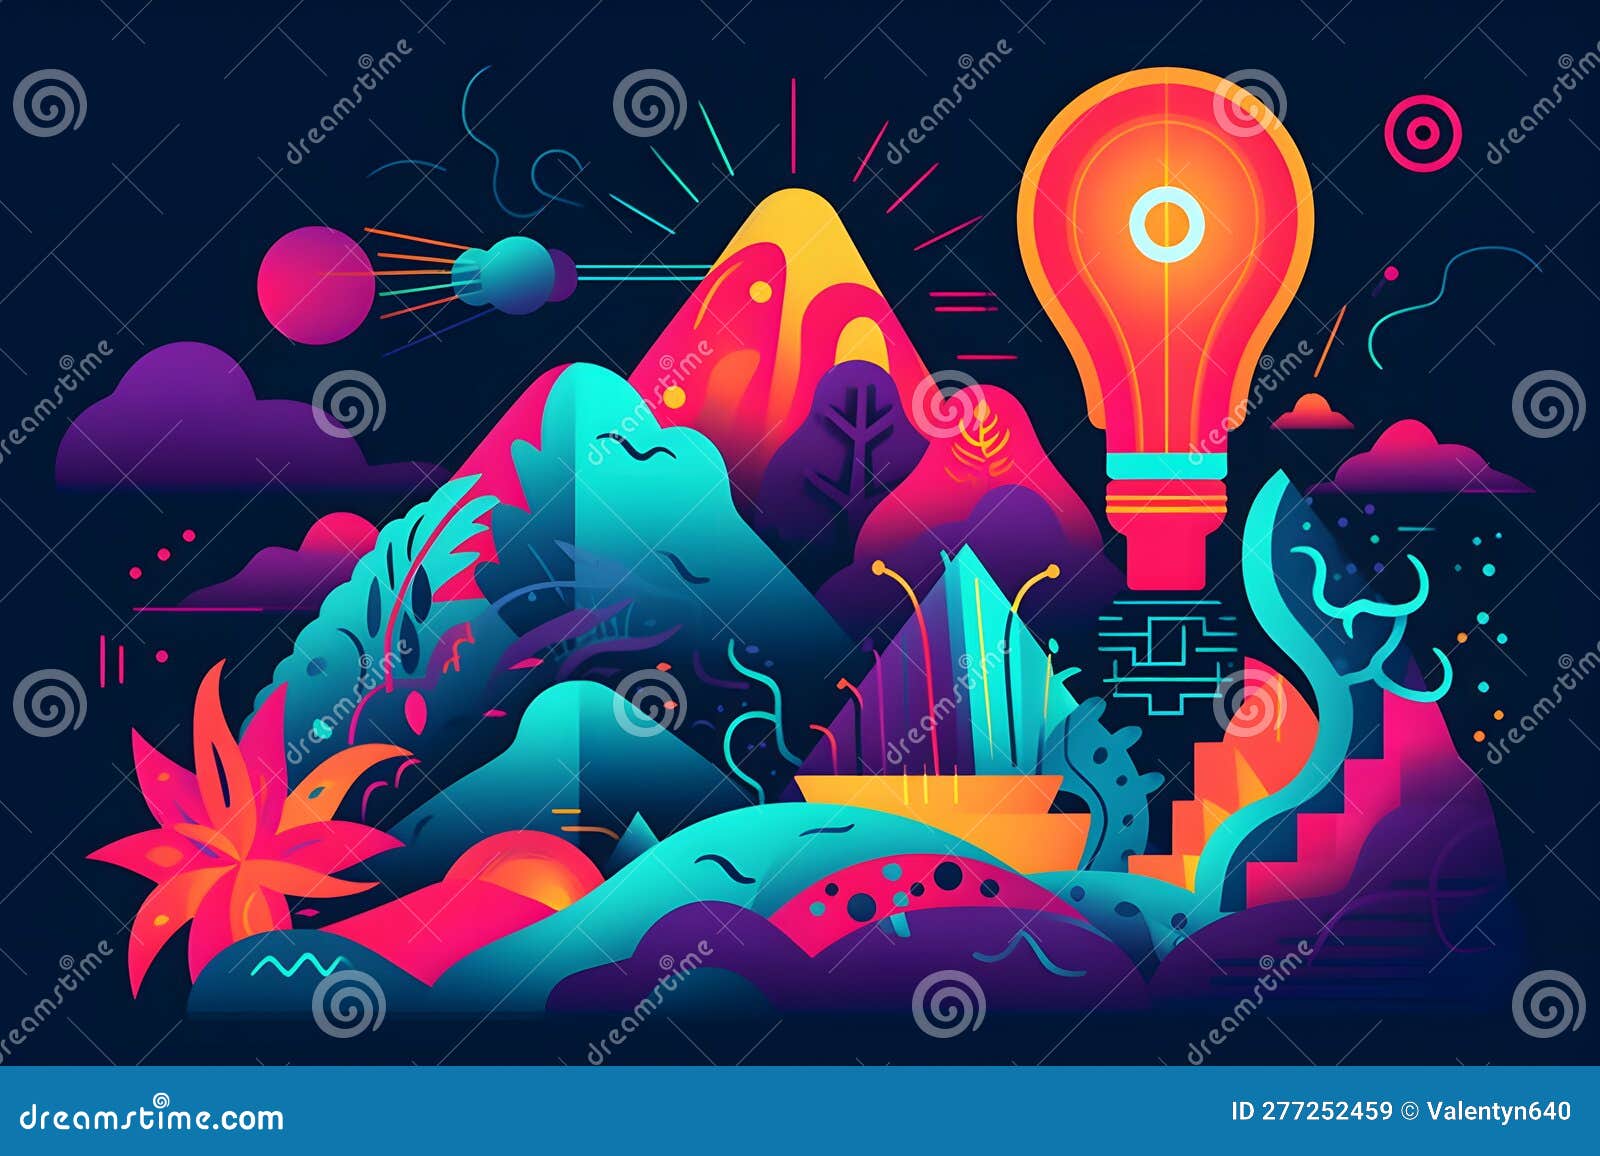 Colorful Image of Light Bulb in the Middle of Mountain Range ...